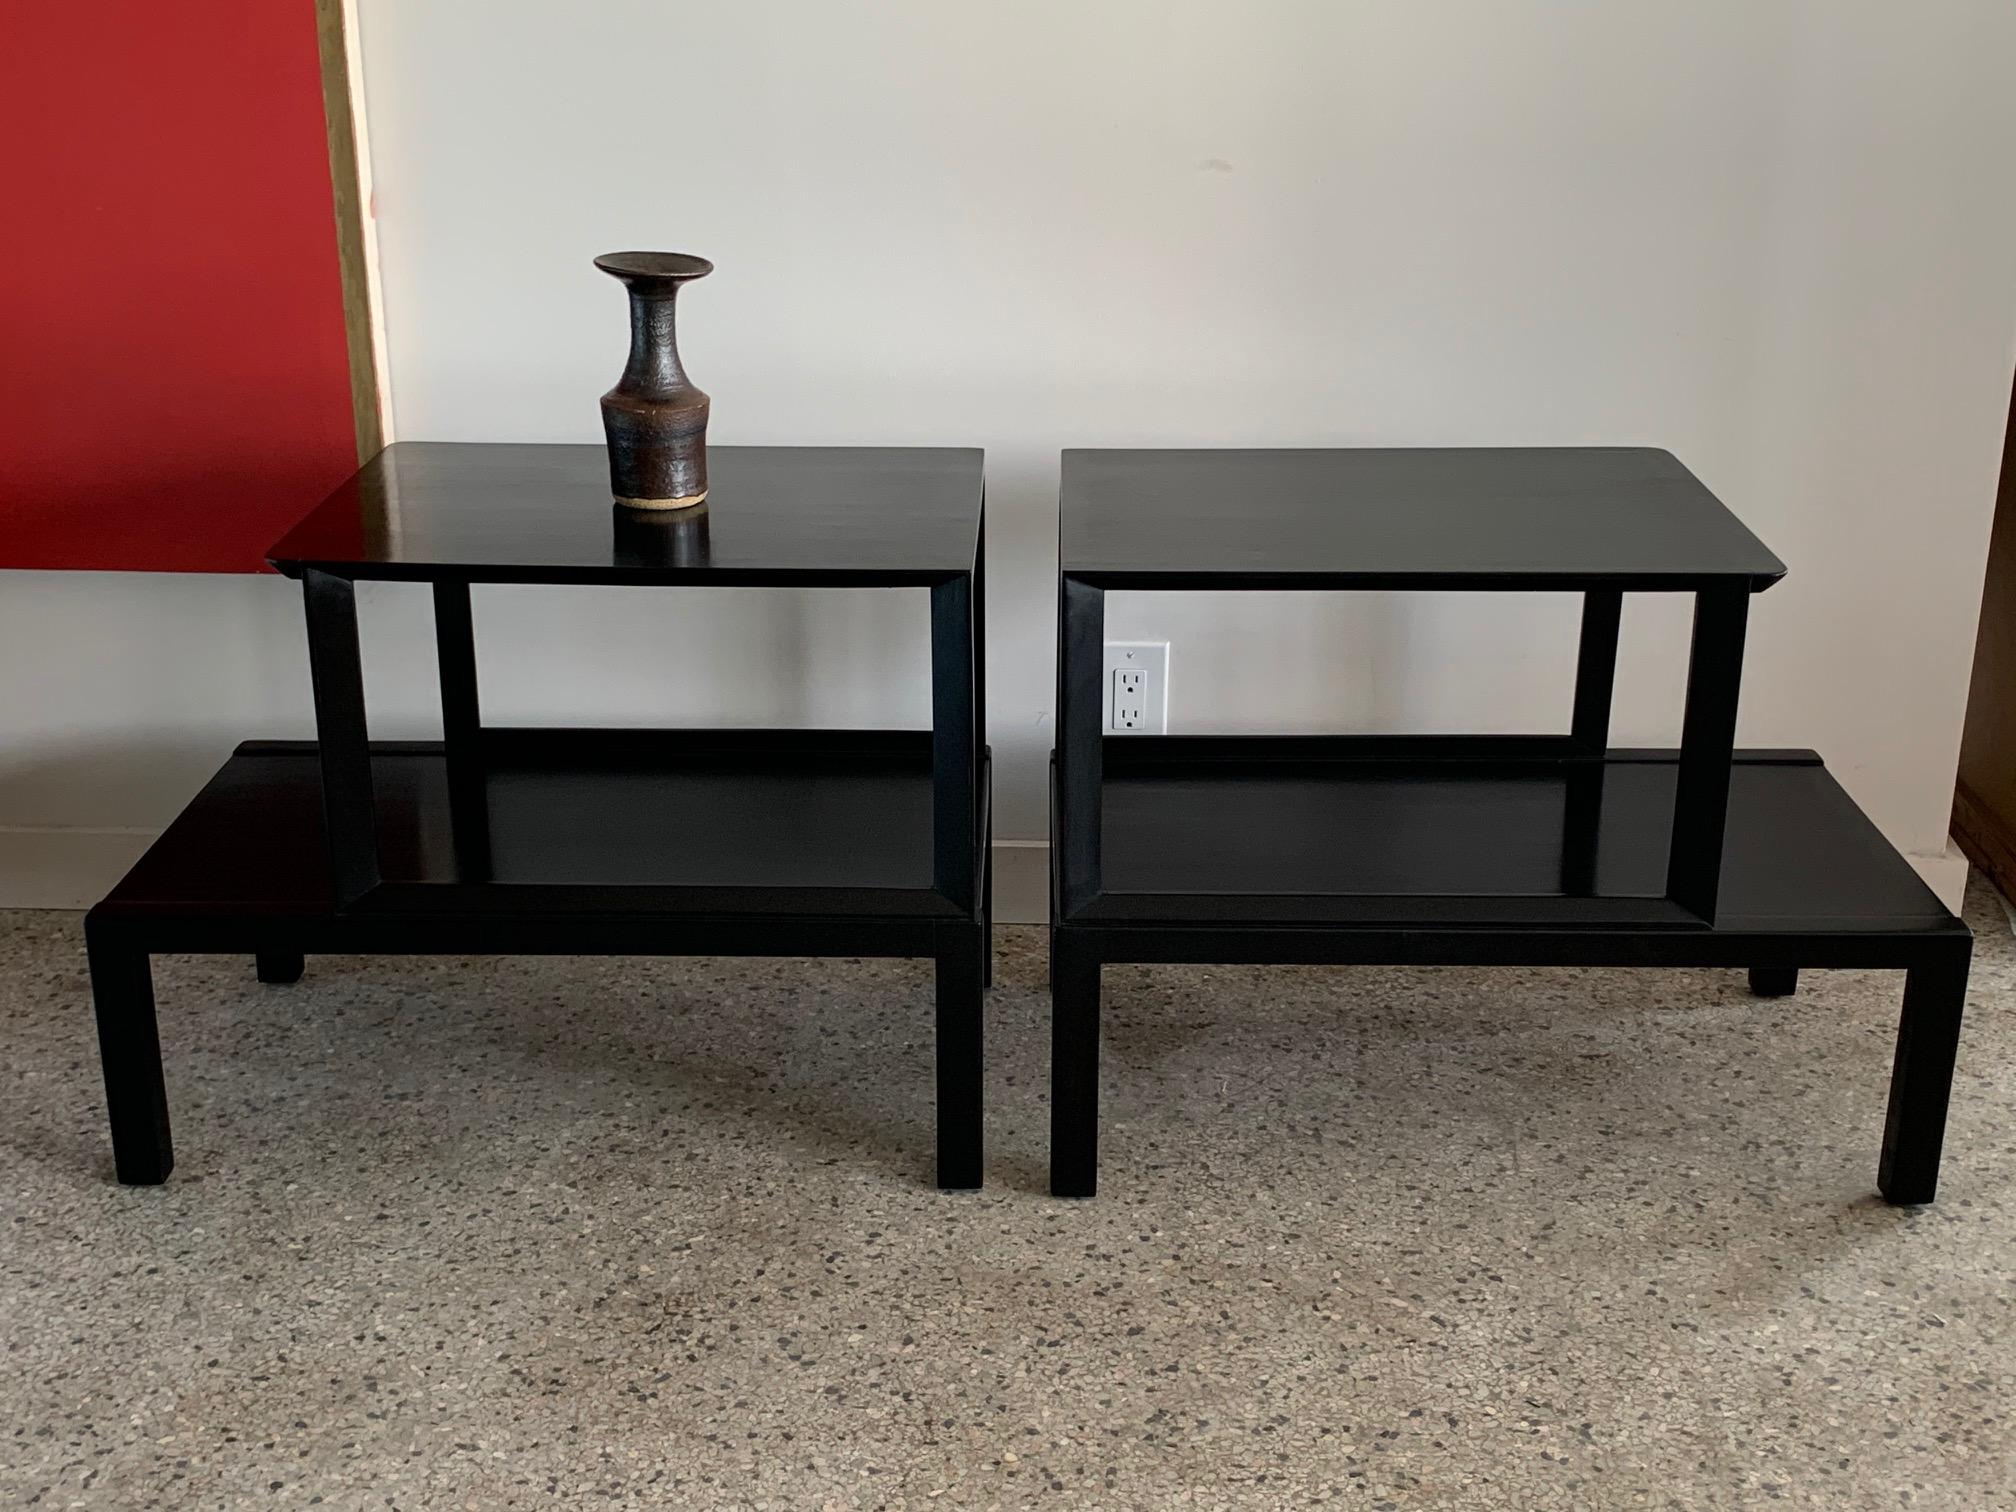 A pair of elegant Edward Wormley designed for Dunbar two-tier tables. Black lacquer, hand polished finish, well made with architectural details.